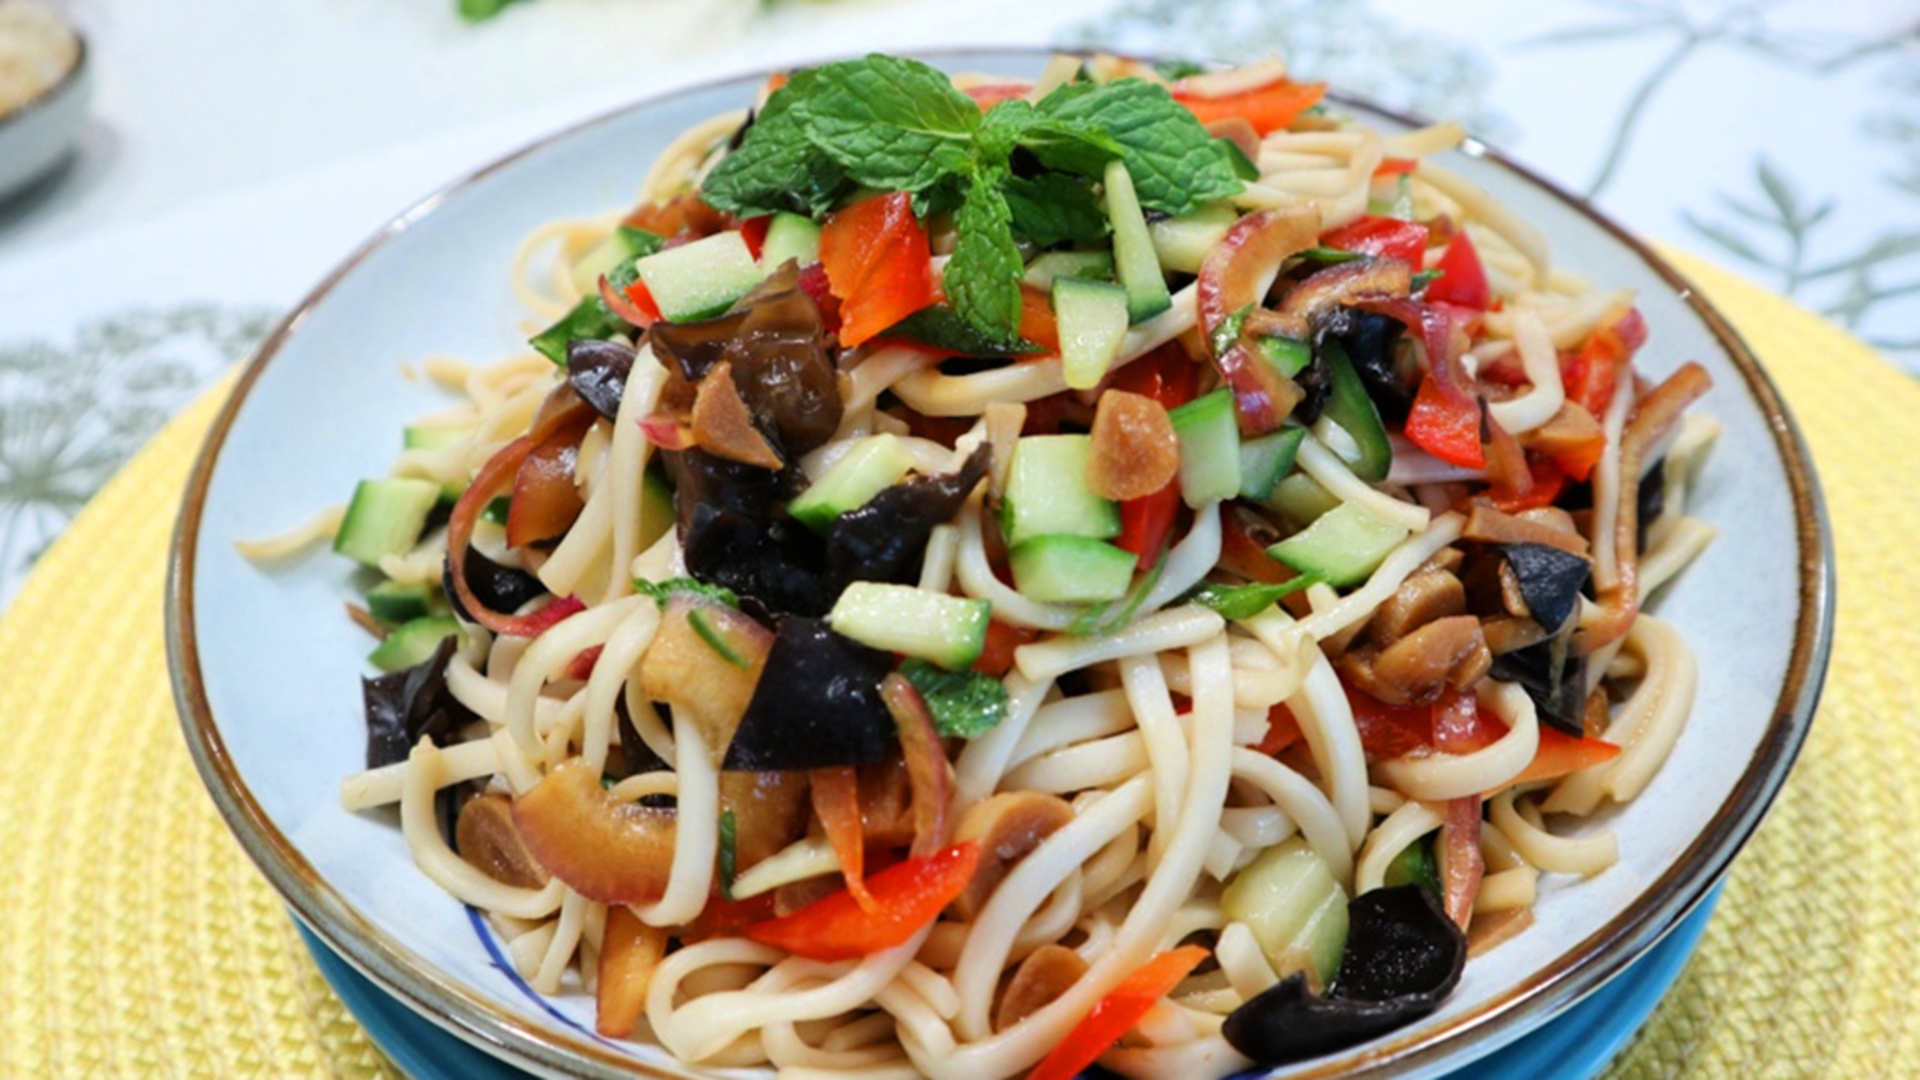 Cold noodle salad with ear mushrooms and a spicy garlic soy dressing